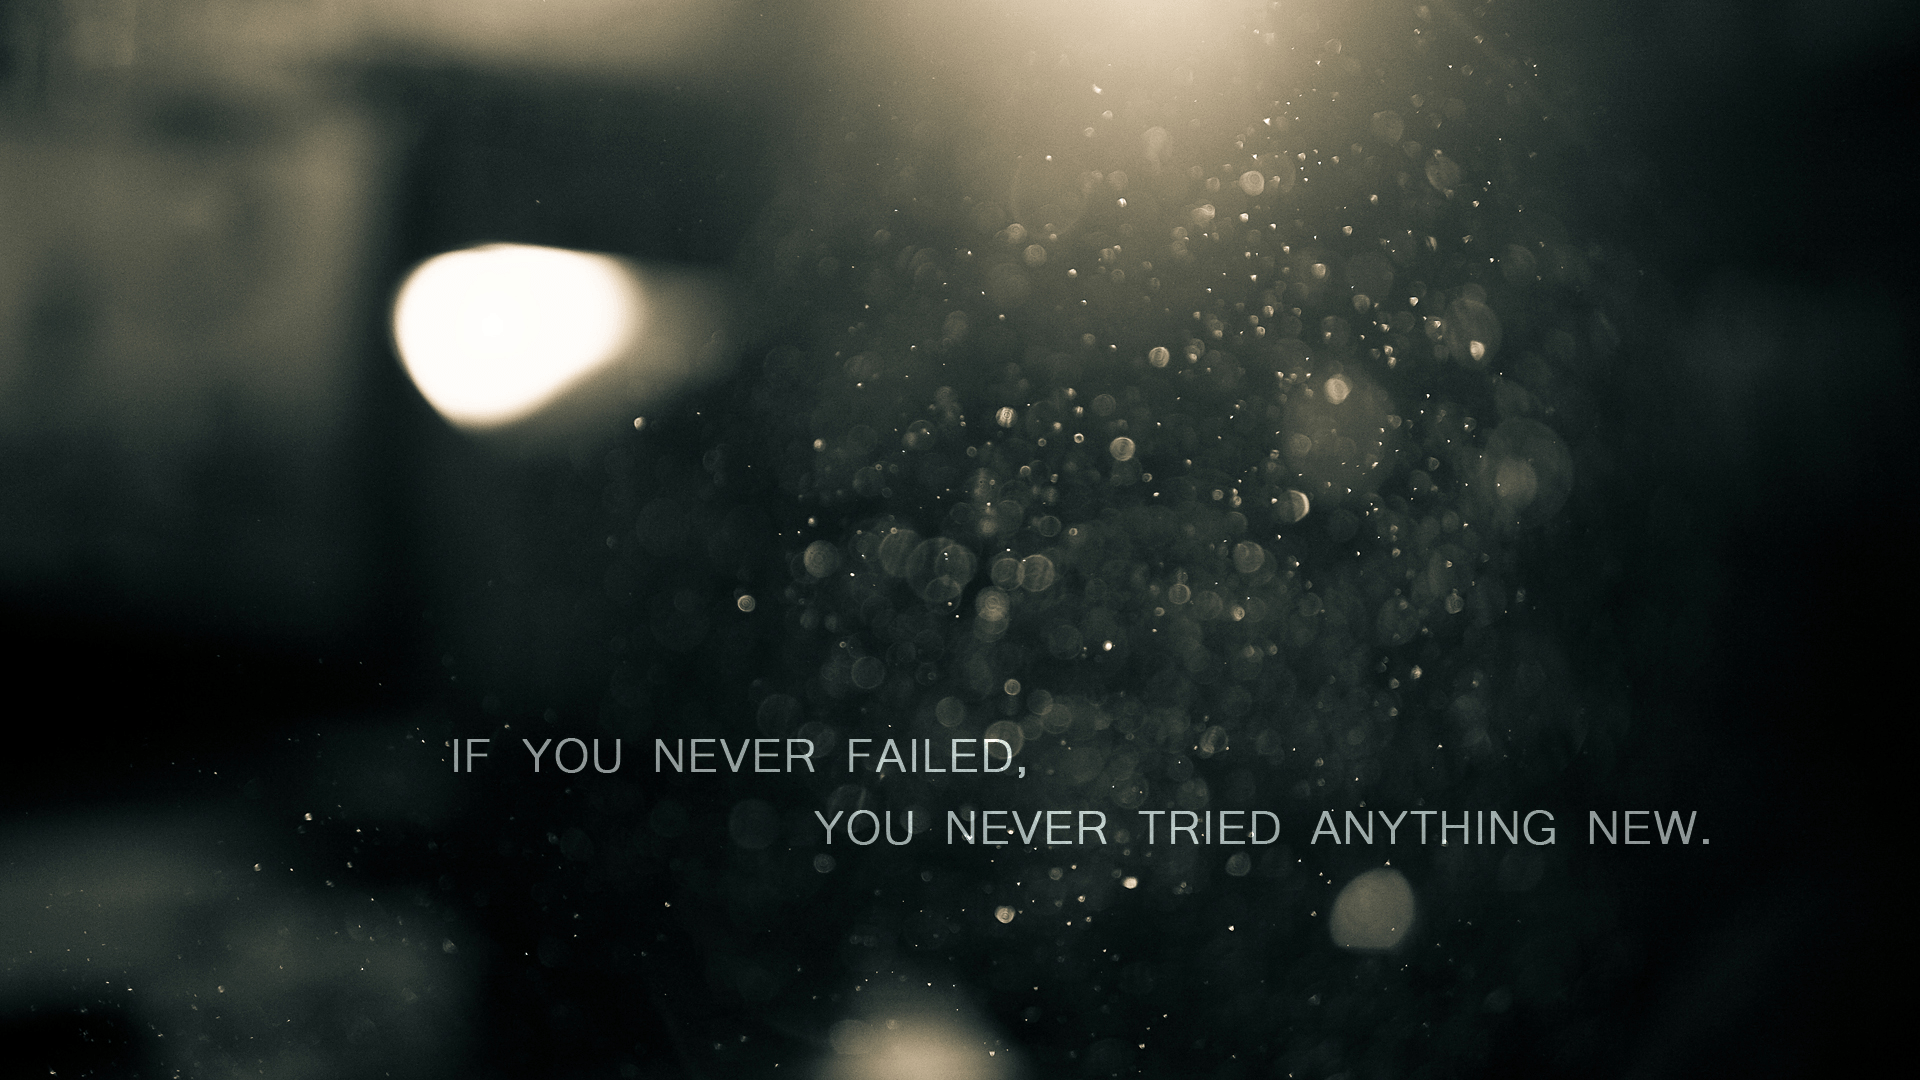 Motivational Wallpapers on